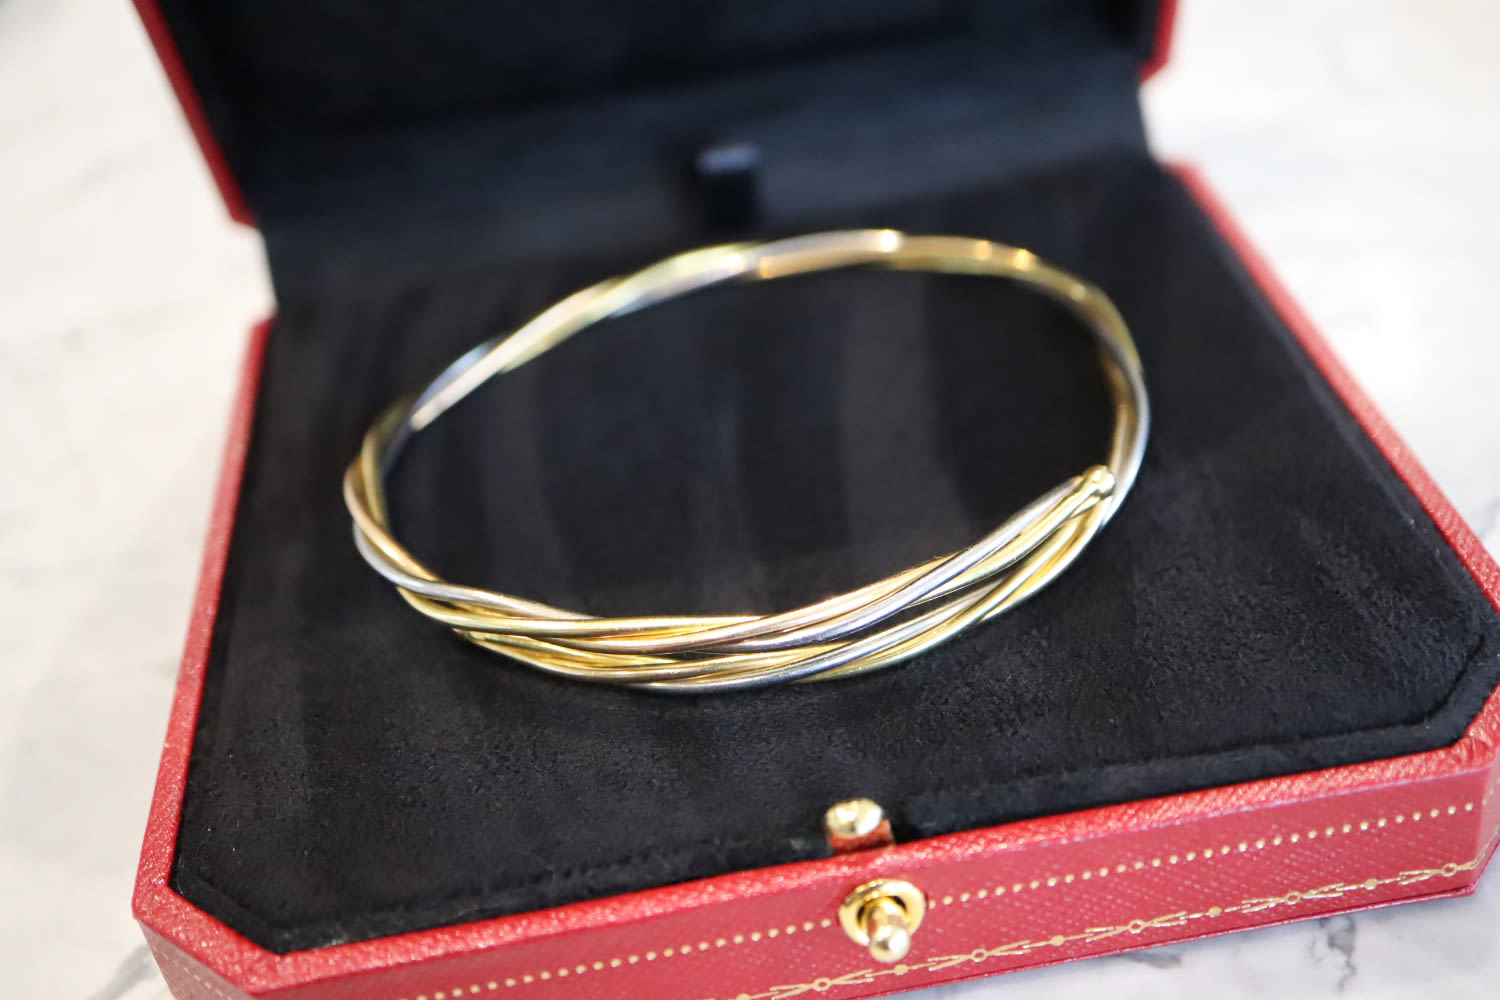 18K TRINITY GOLD BANGLE (YELLOW, WHITE & ROSE GOLD) - SIGNED 'CARTIER'